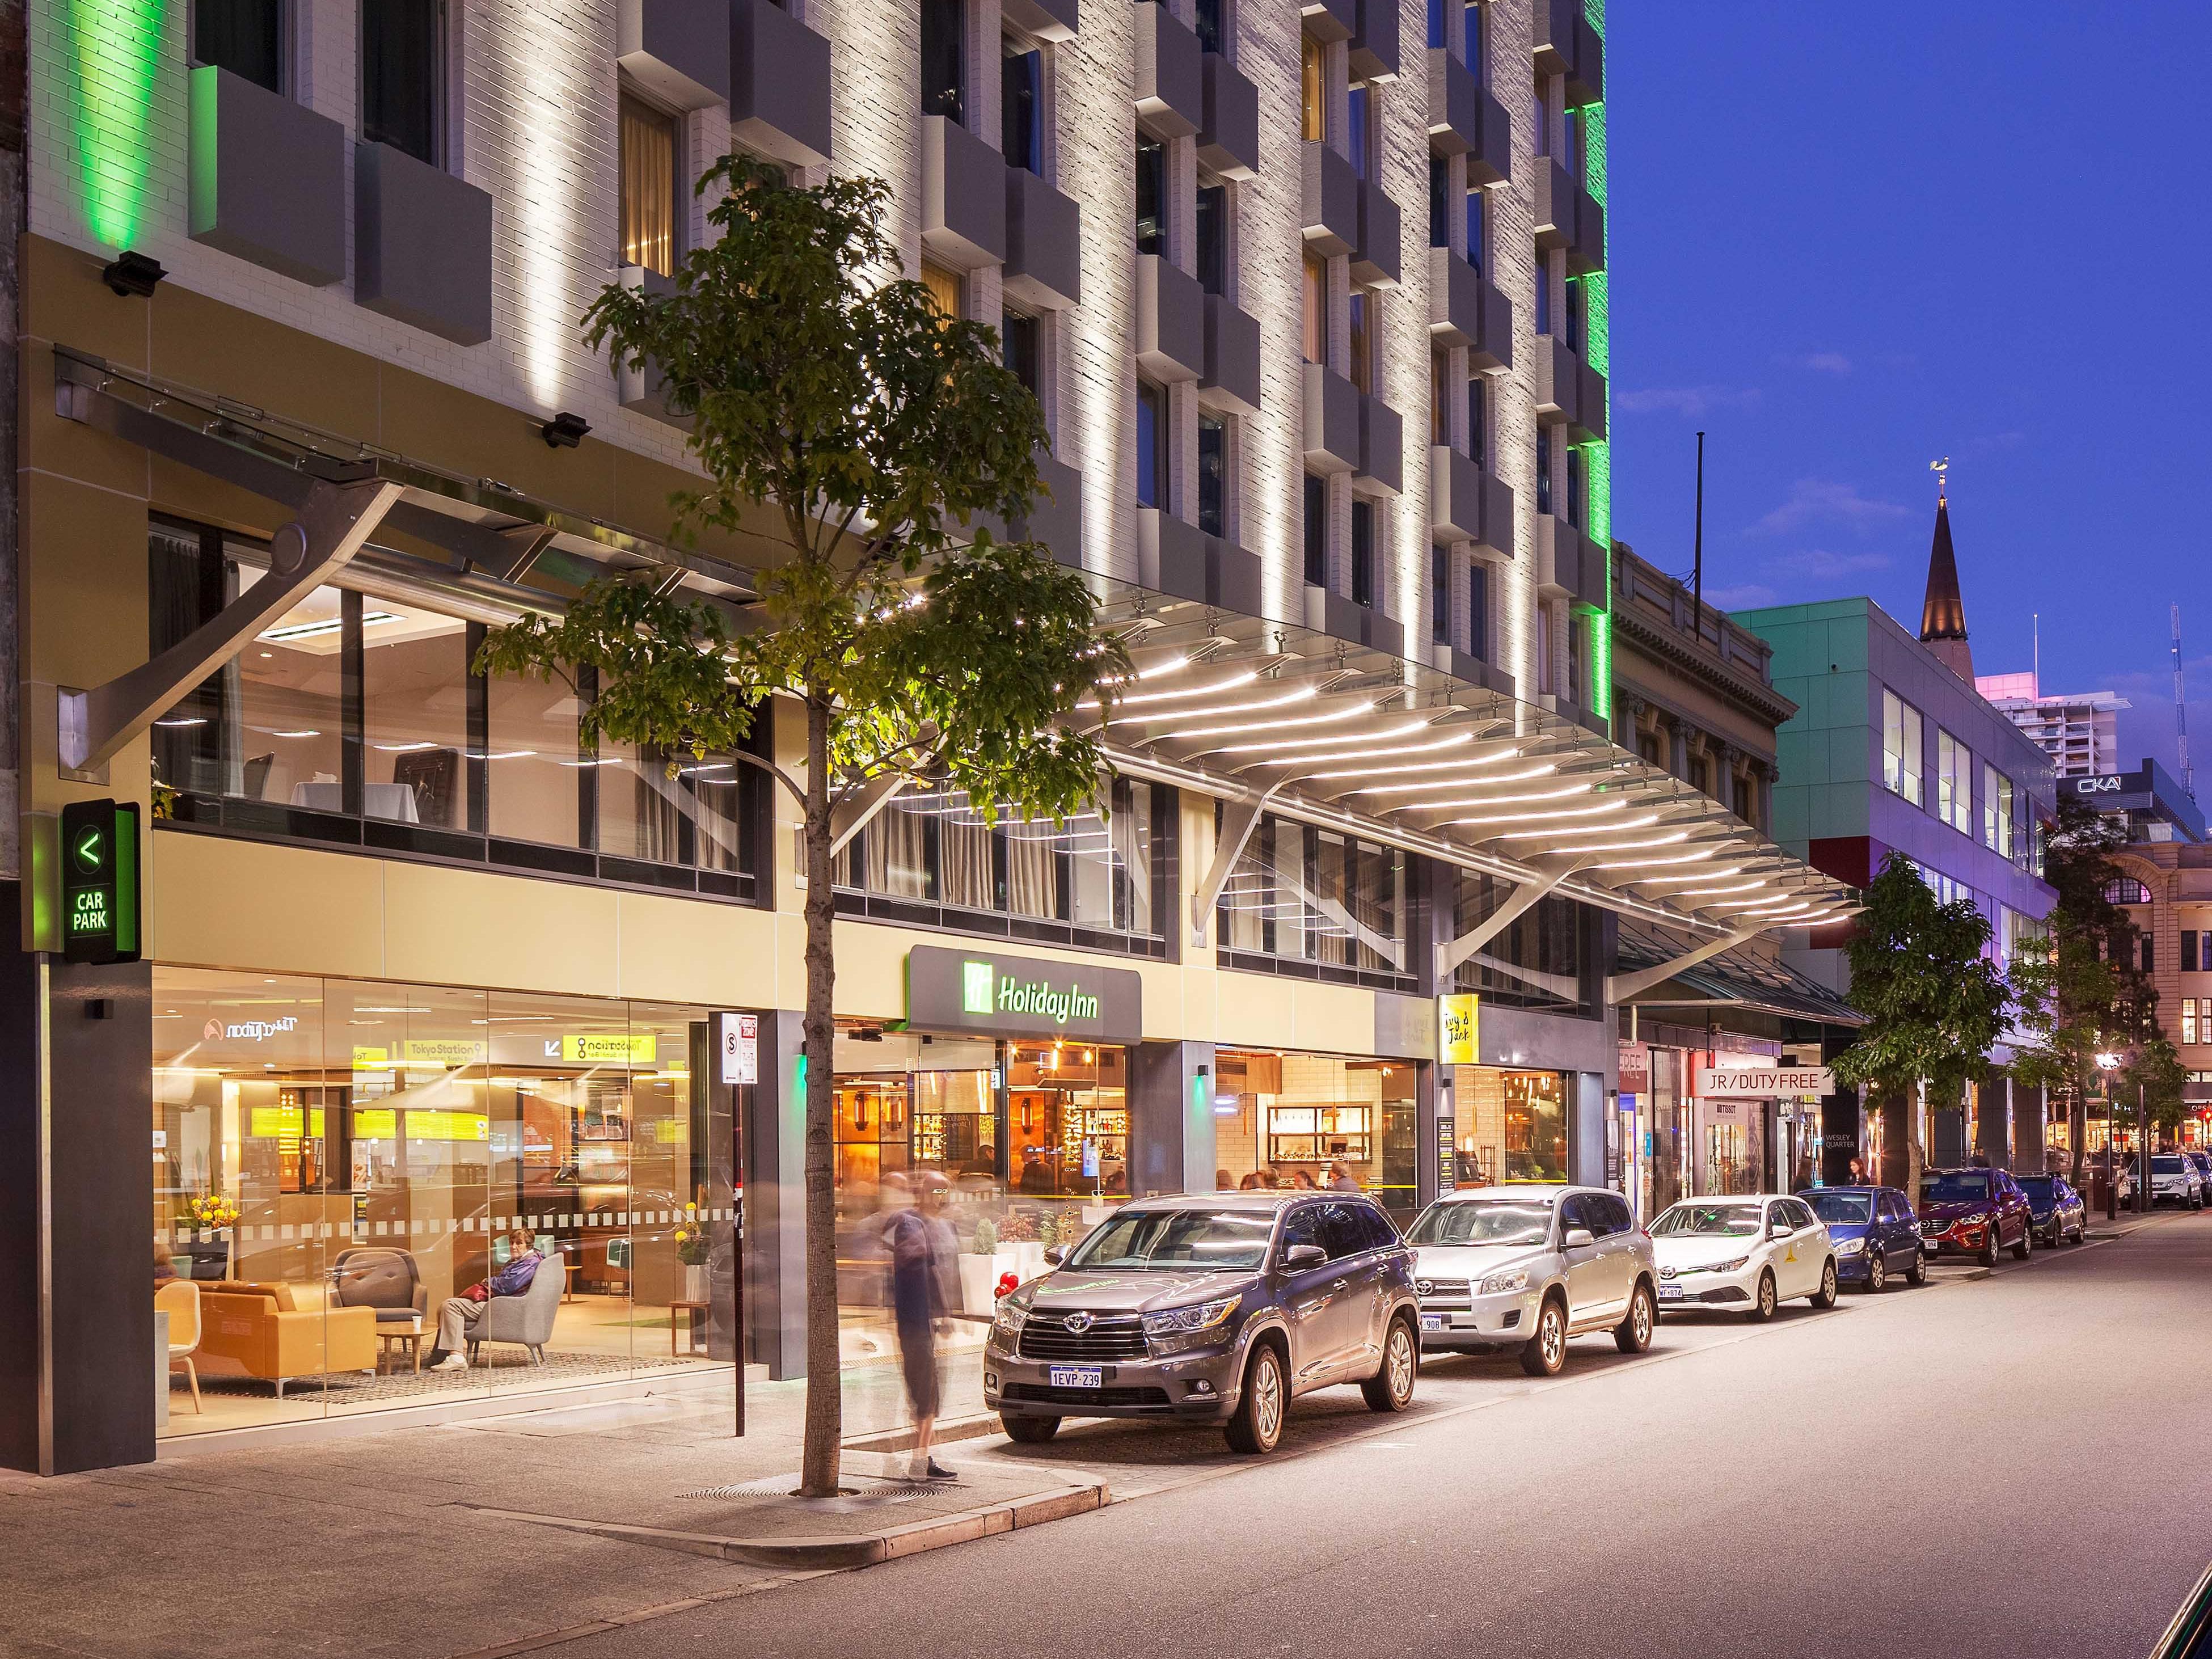 With Perth's best attractions, entertainment, dining and shopping at it's doorstep, Holiday Inn Perth City Centre is the ideal place to stay while exploring our beautiful city.
Heading to a concert or show? We are perfectly situated just a short walk away from Perth Arena and short train ride to Optus Stadium.